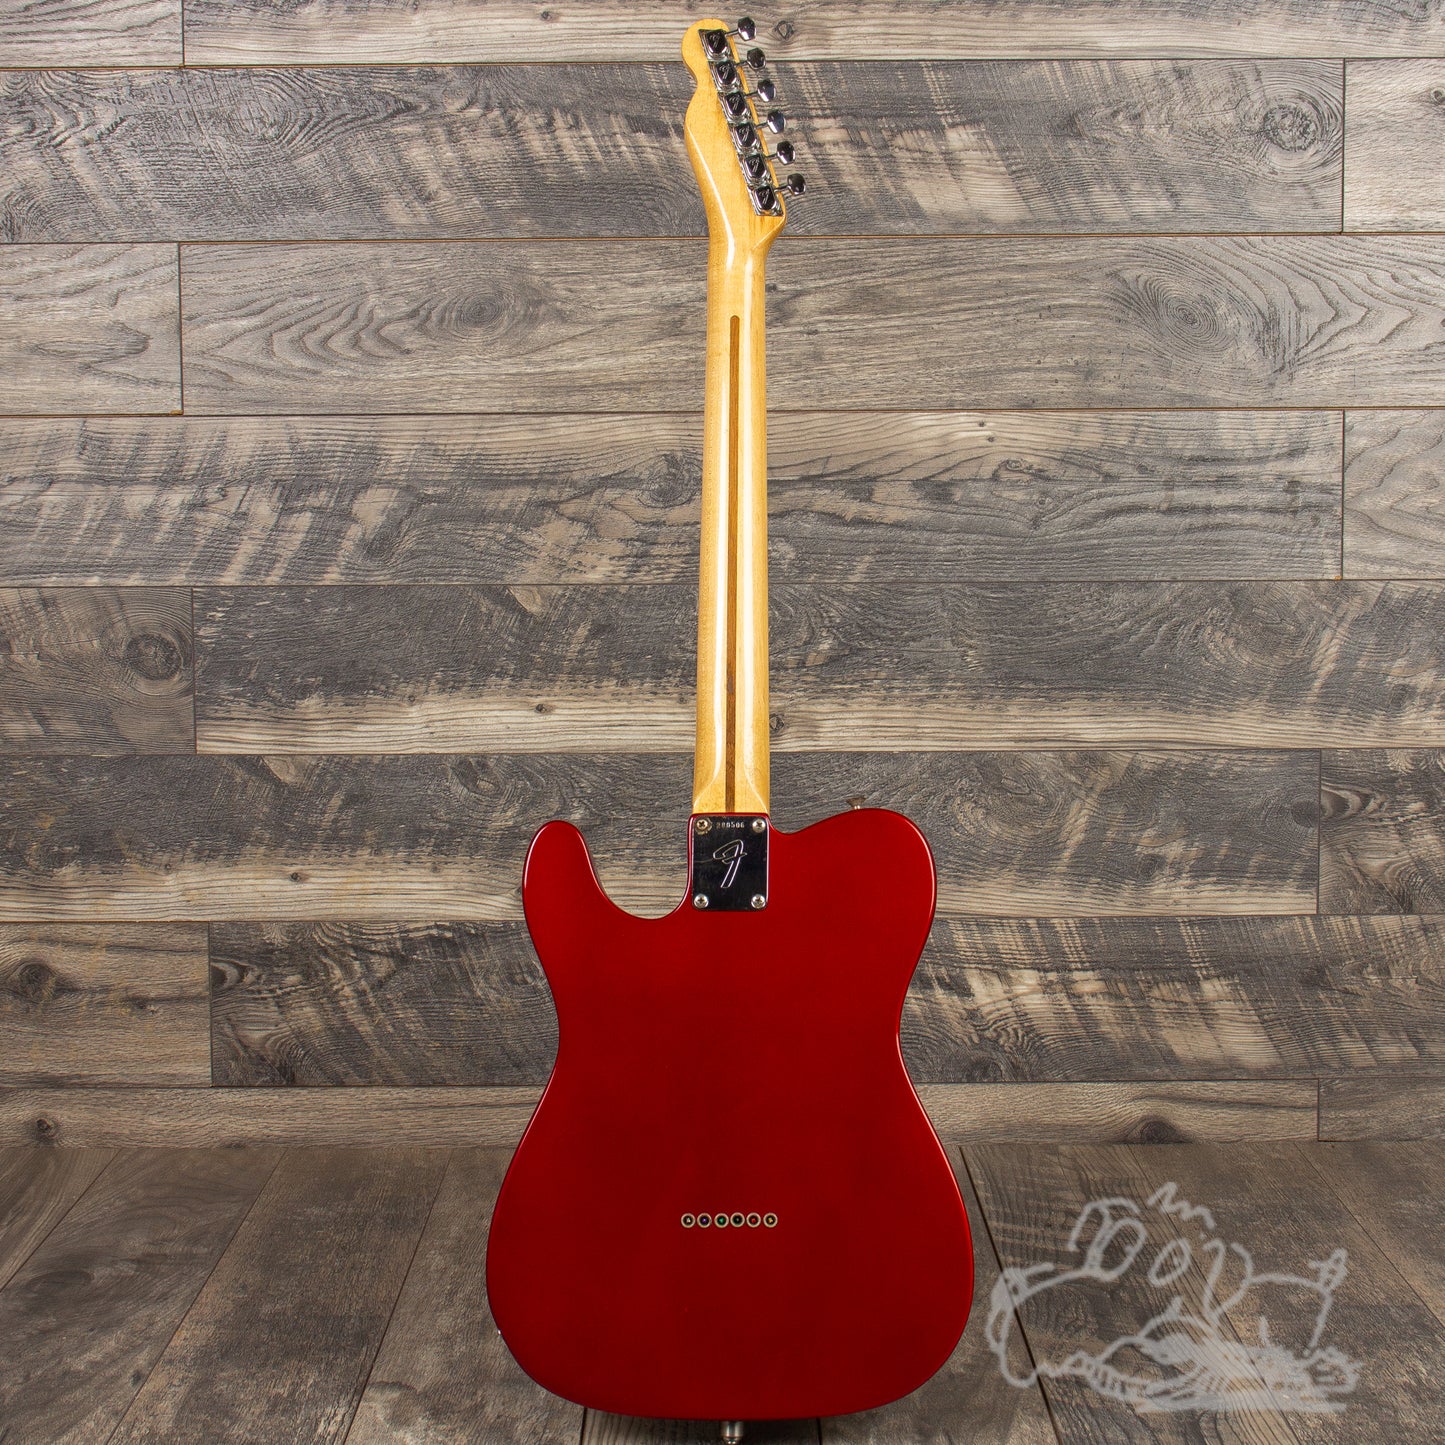 1971 Fender Telecaster Candy Apple Red